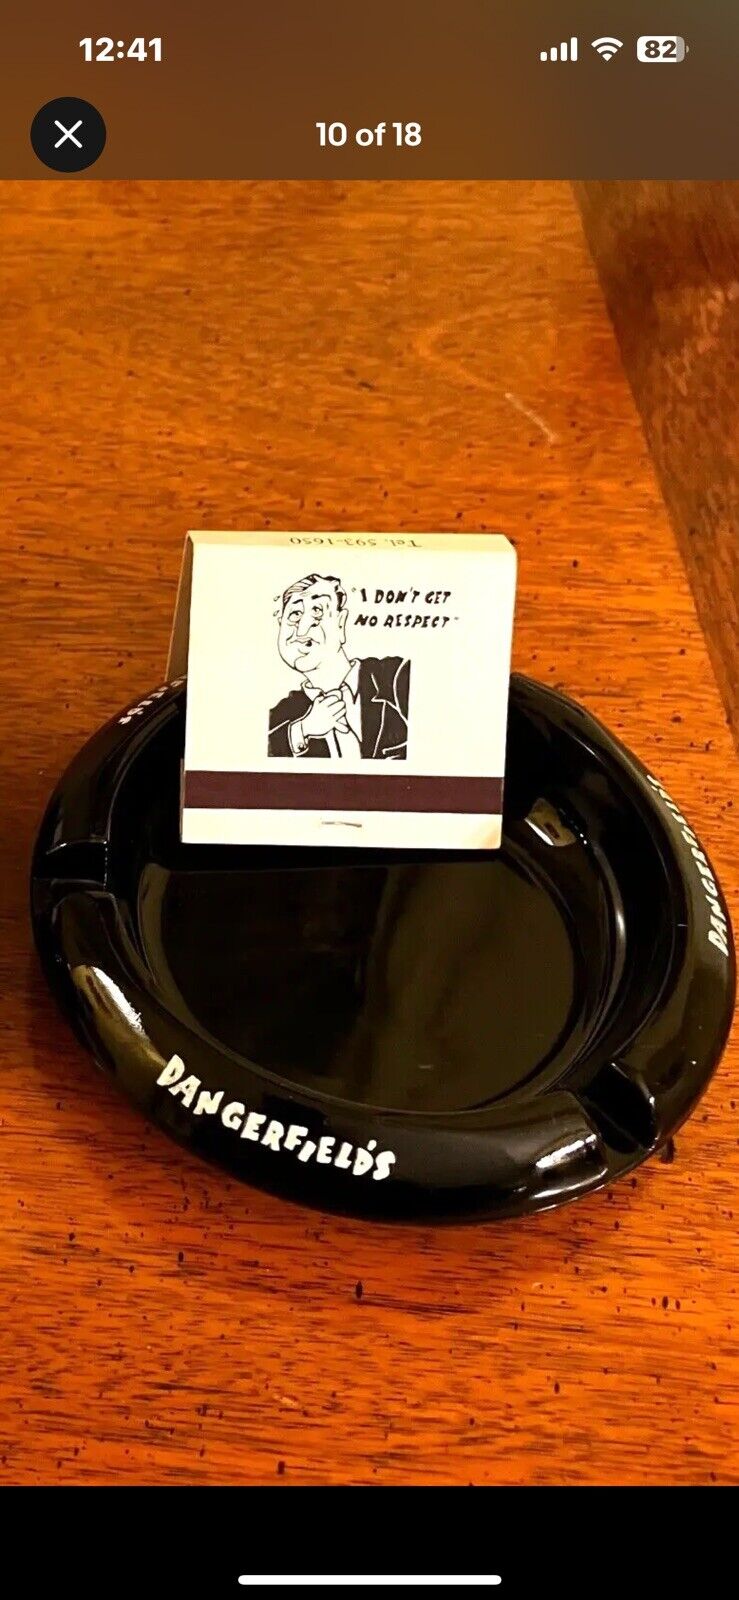 DANGERFIELD’S NYC VINTAGE AMETHYST BLACK GLASS ASHTRAY AND MATCHBOOK CIRCA 1972